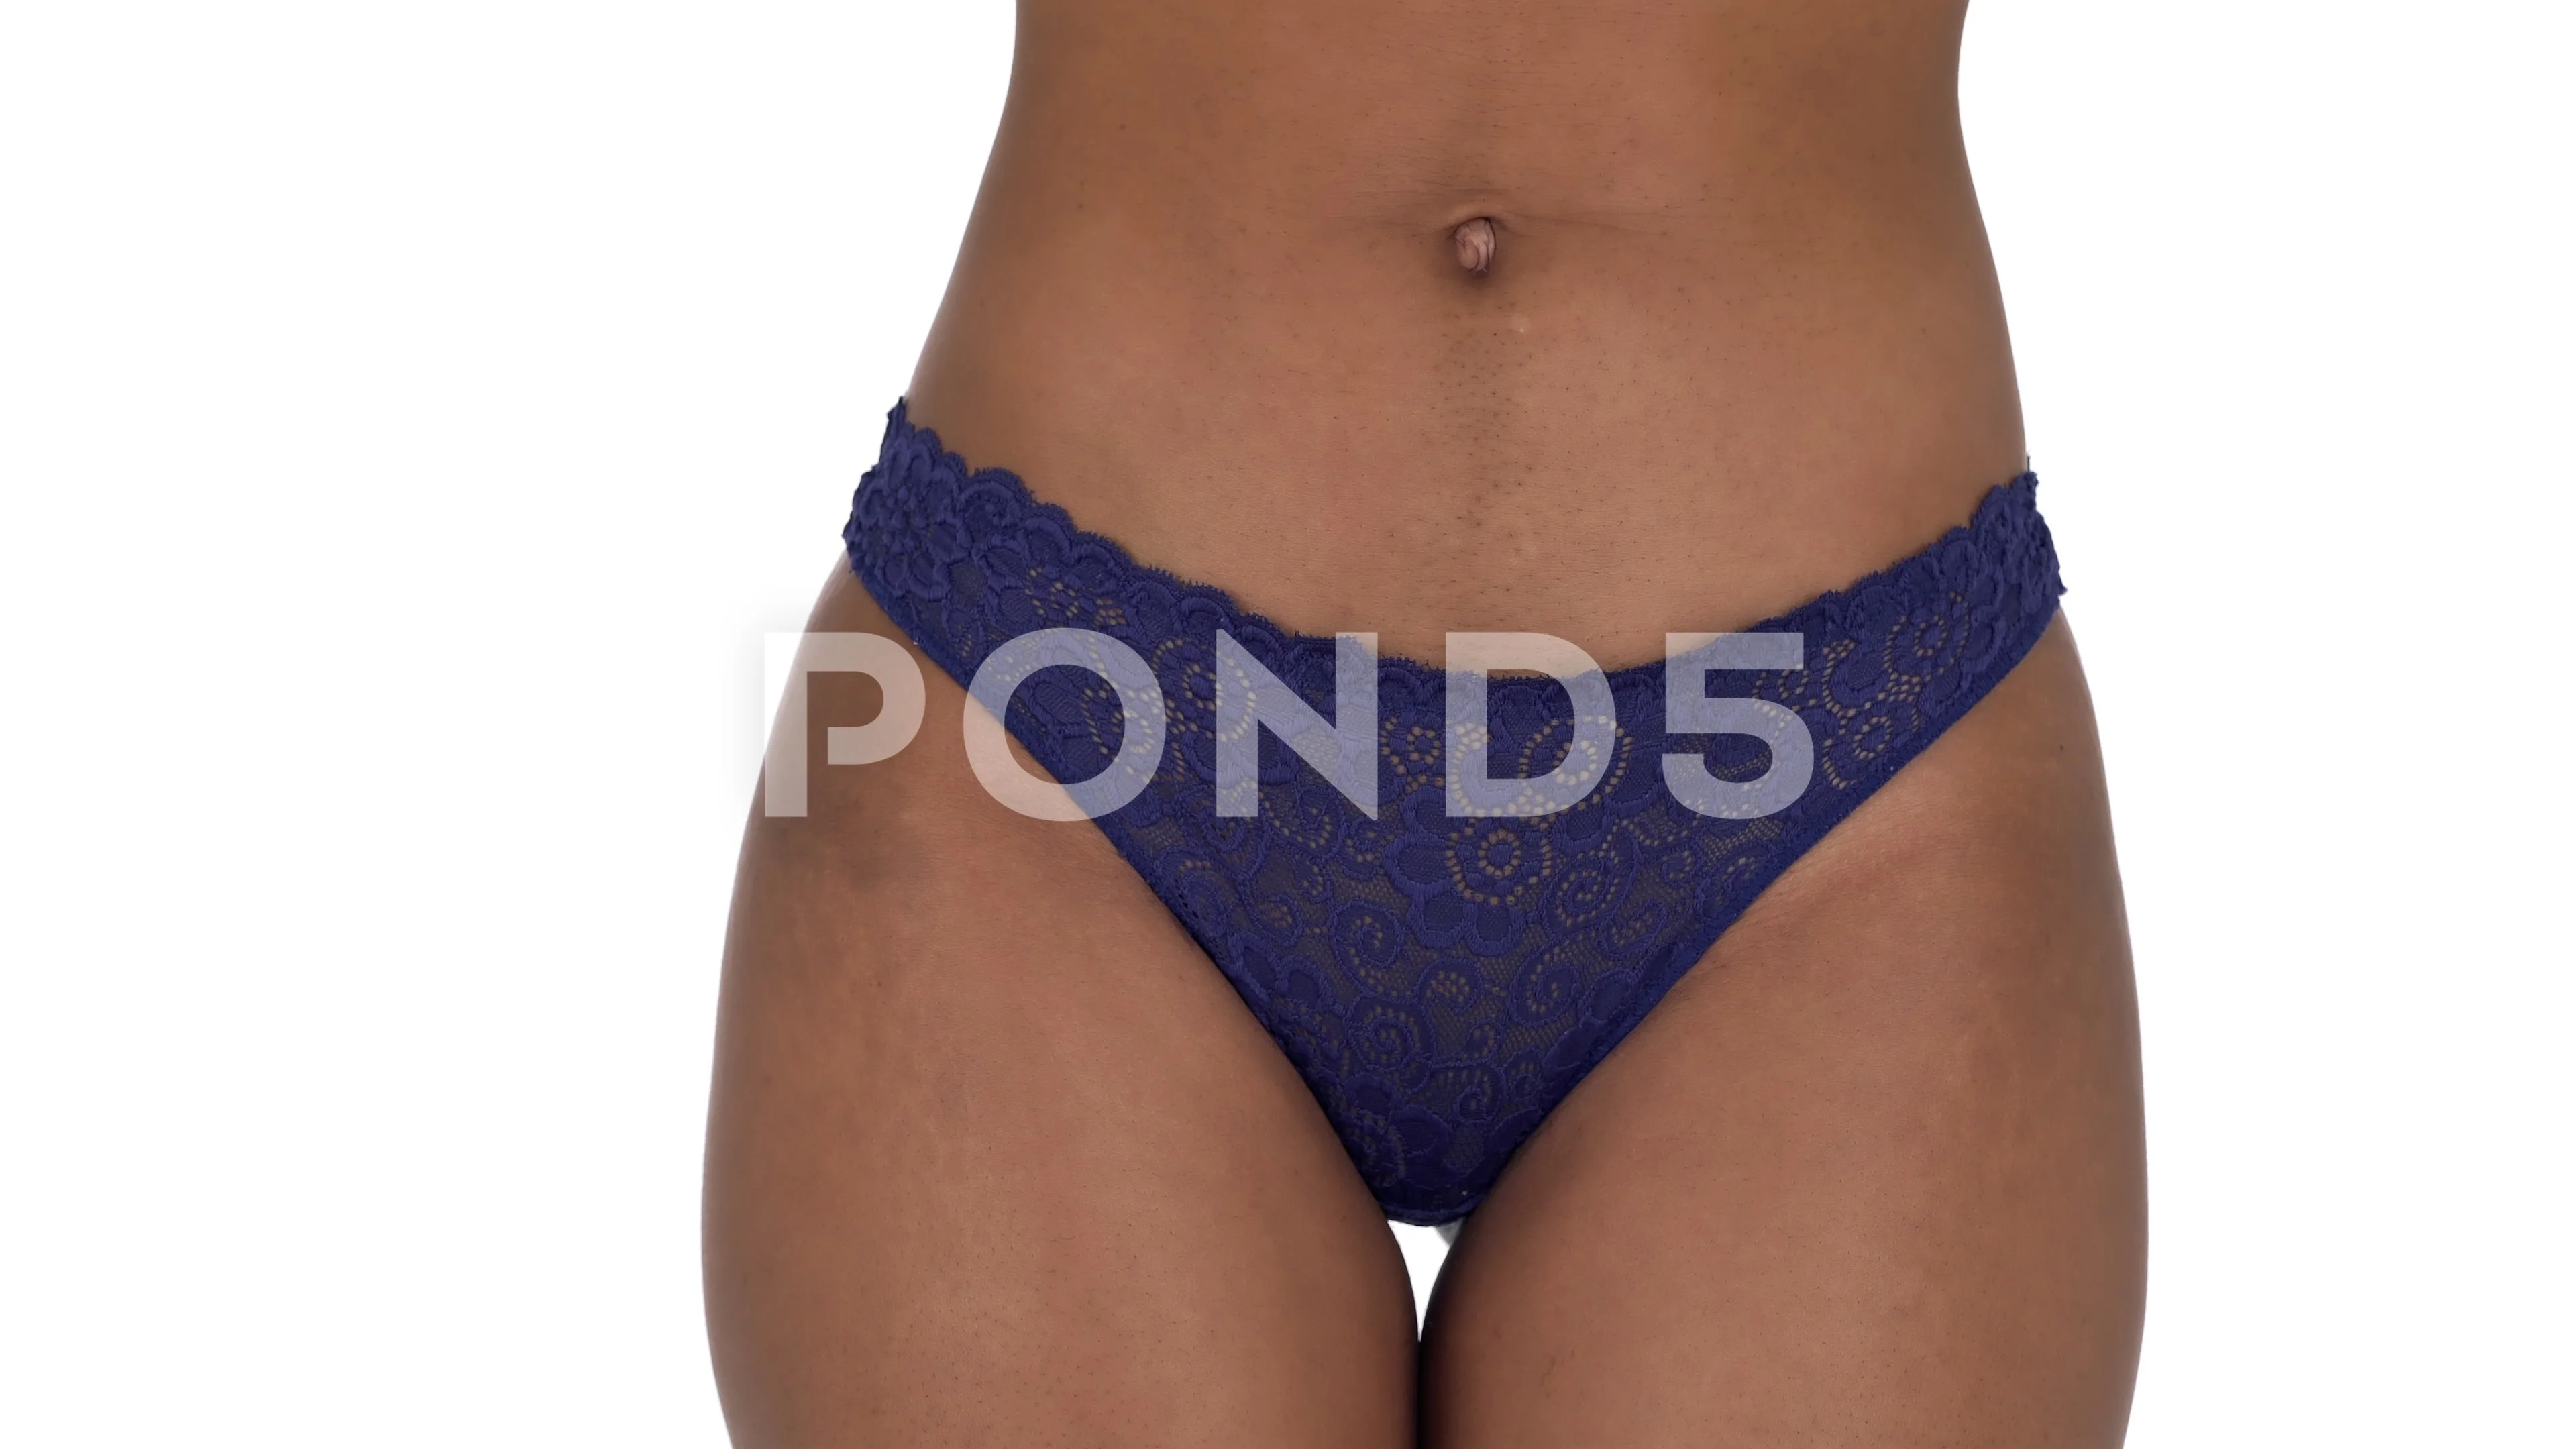 Blue Worn Dirty Women S Panties Close-up Stock Image - Image of outerwear,  underwear: 250893743